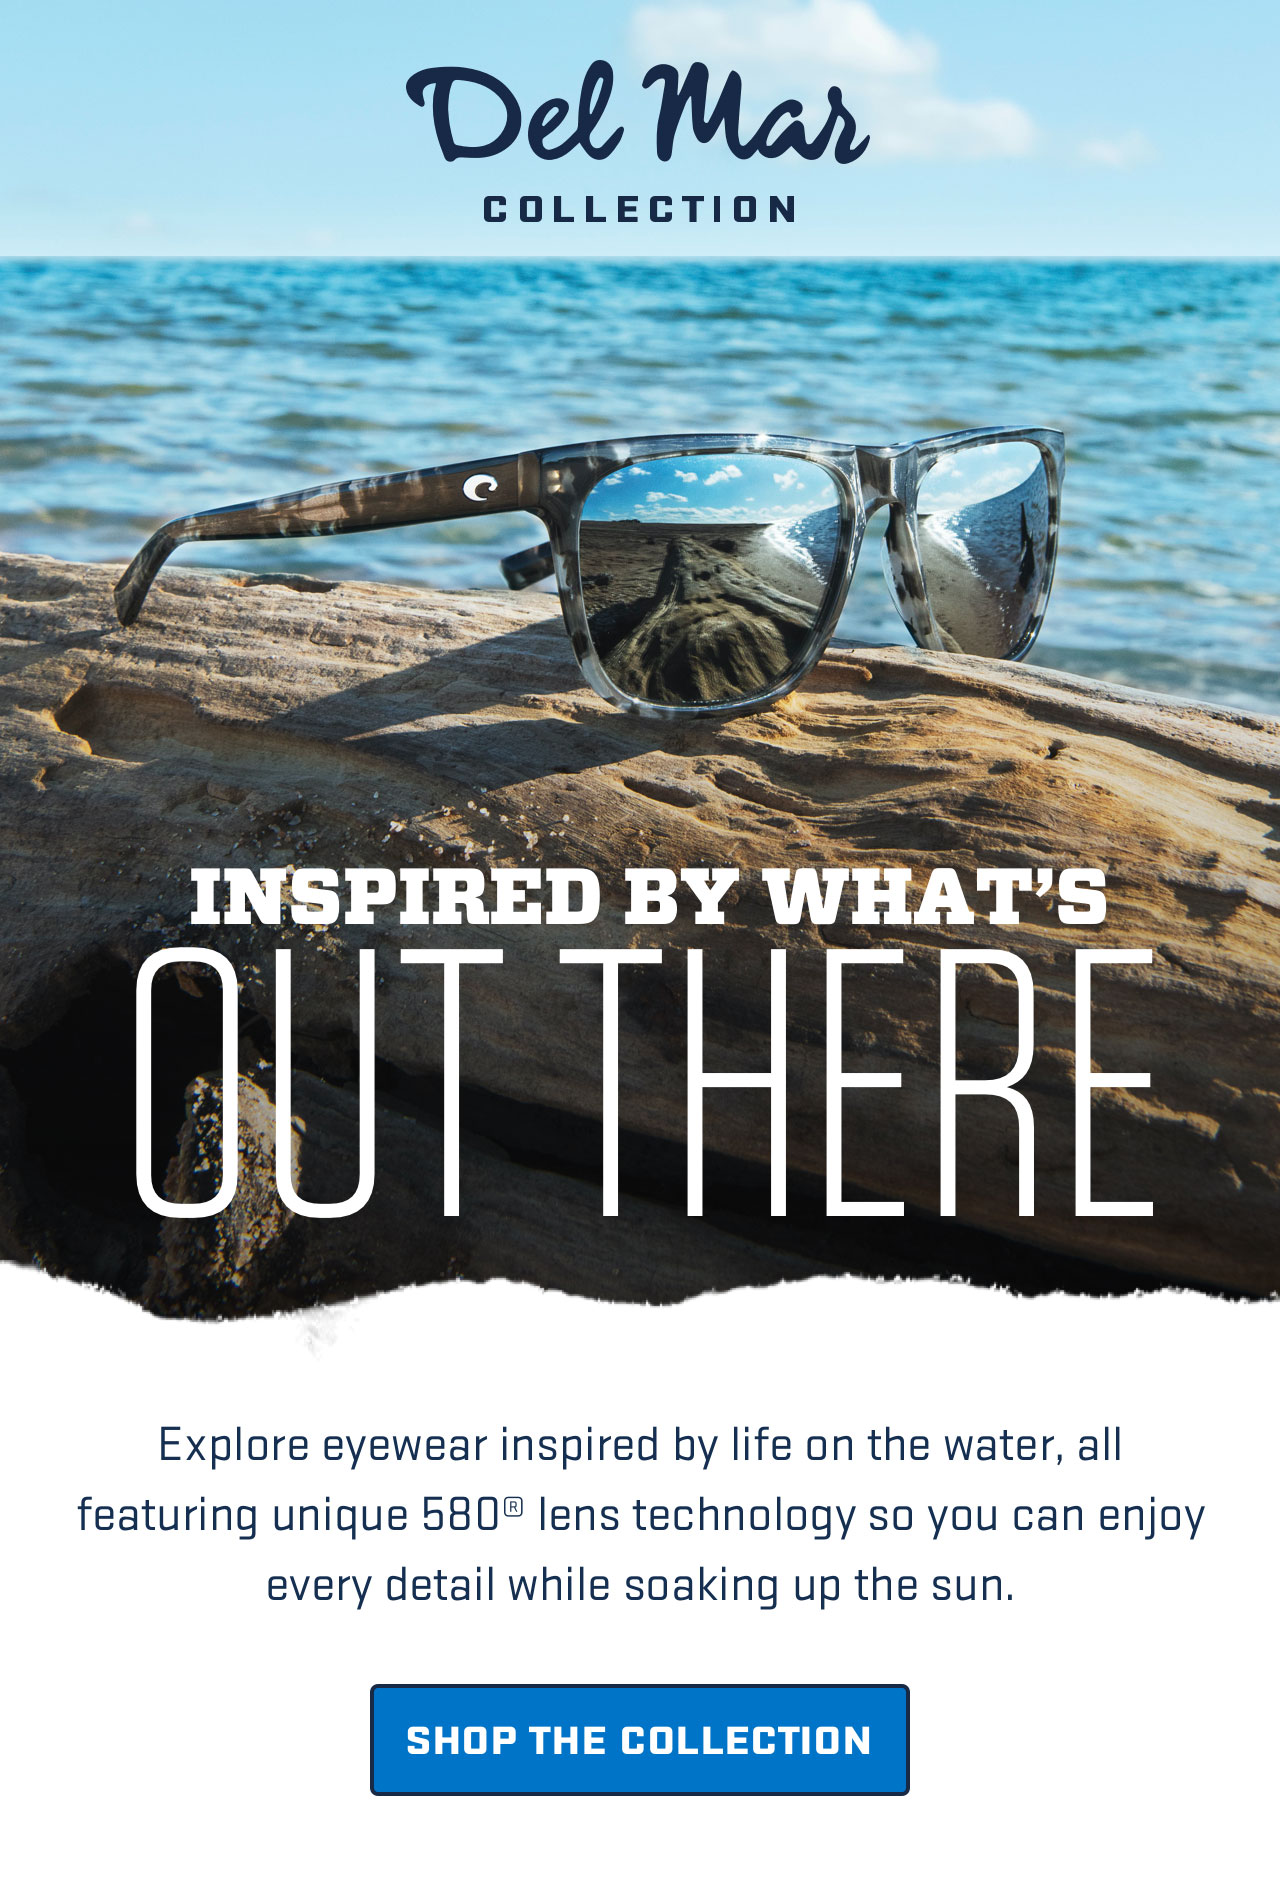 

Del Mar
COLLECTION

INSPIRED BY WHAT’S
OUT THERE

Explore eyewear inspired by life on the water, all
featuring unique 580® lens technology so you can enjoy
every detail while soaking up the sun.

[ SHOP THE COLLECTION ]


									